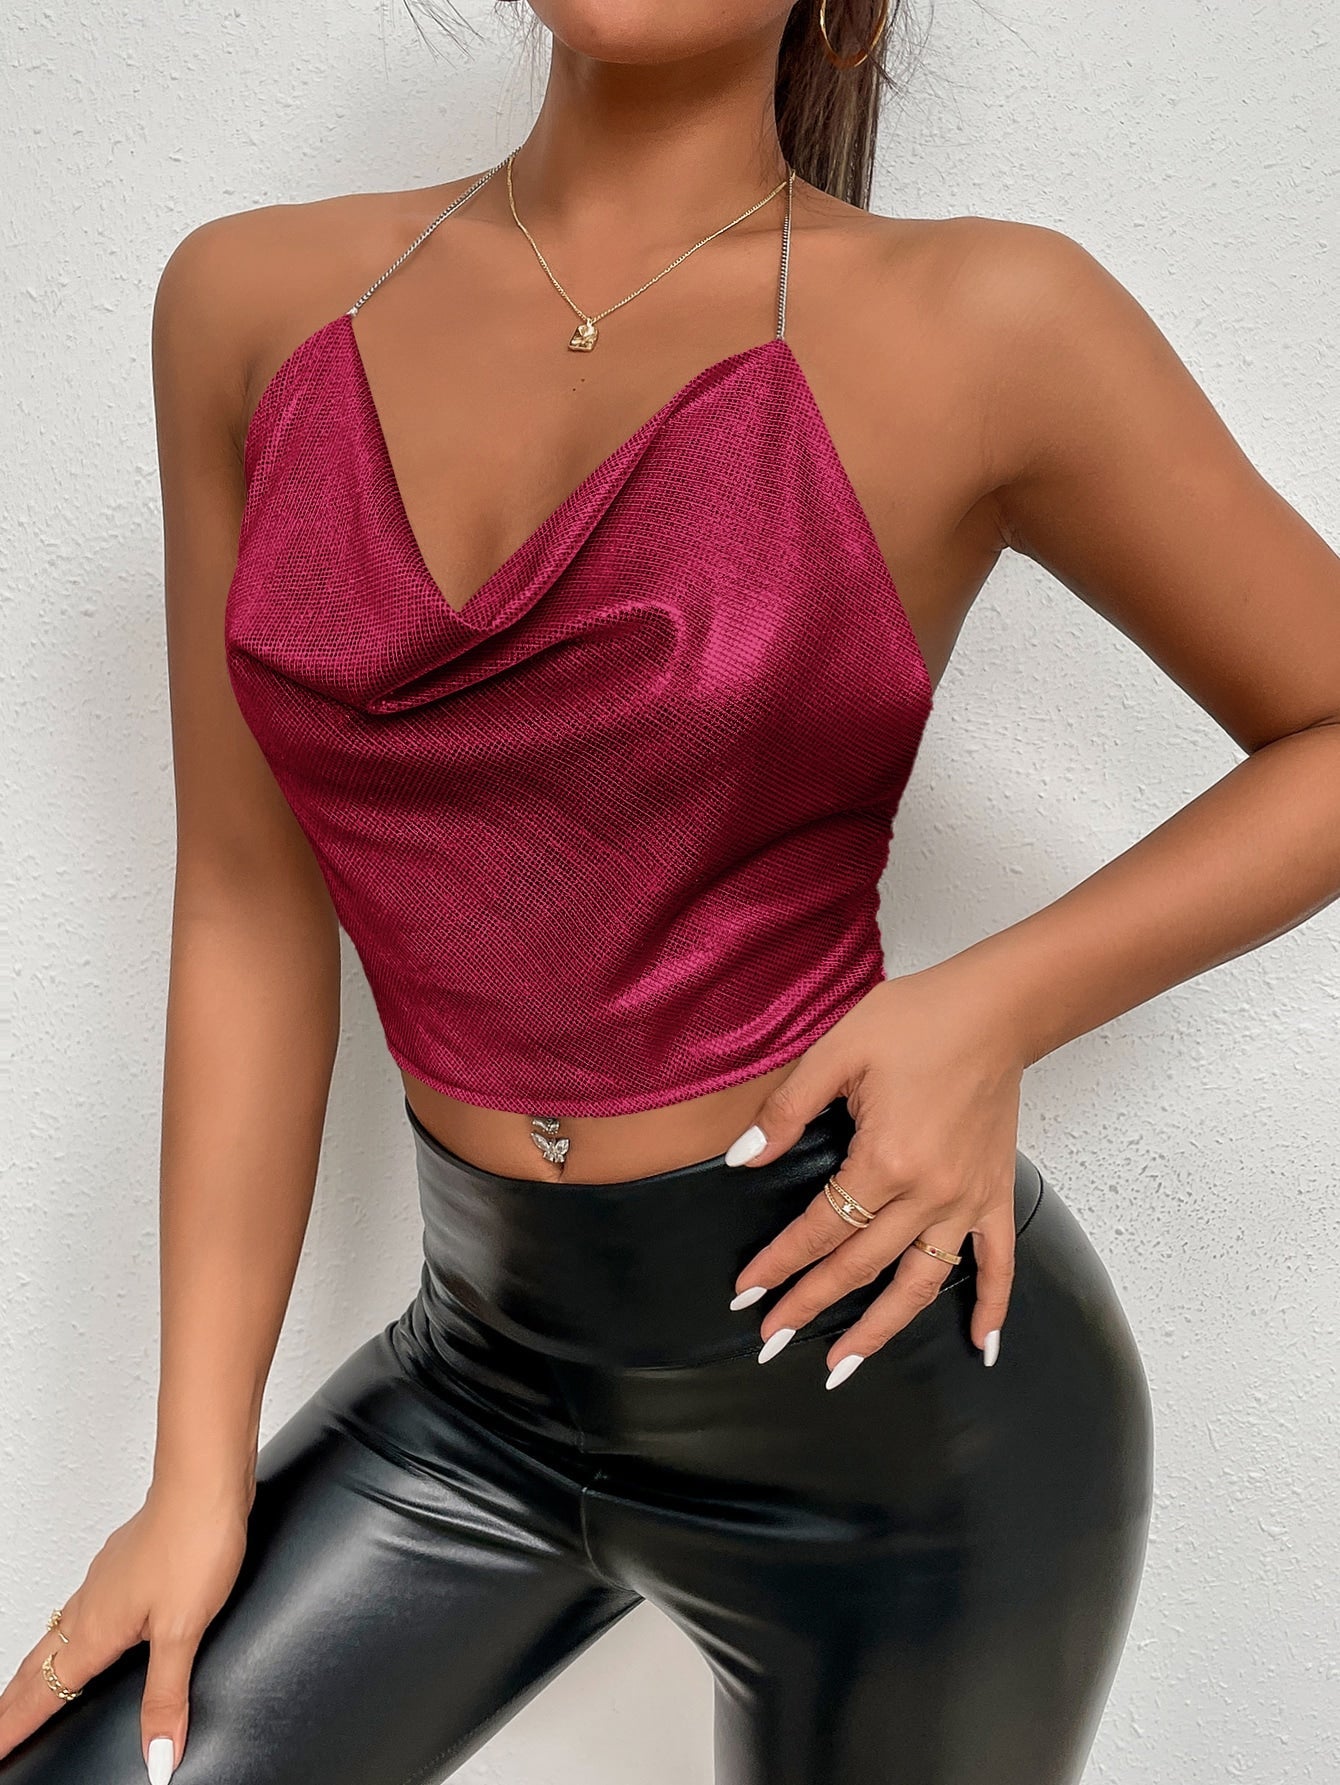 Draped Collar Chain Detail Tie Backless Glitter Halter Top - Negative Apparel